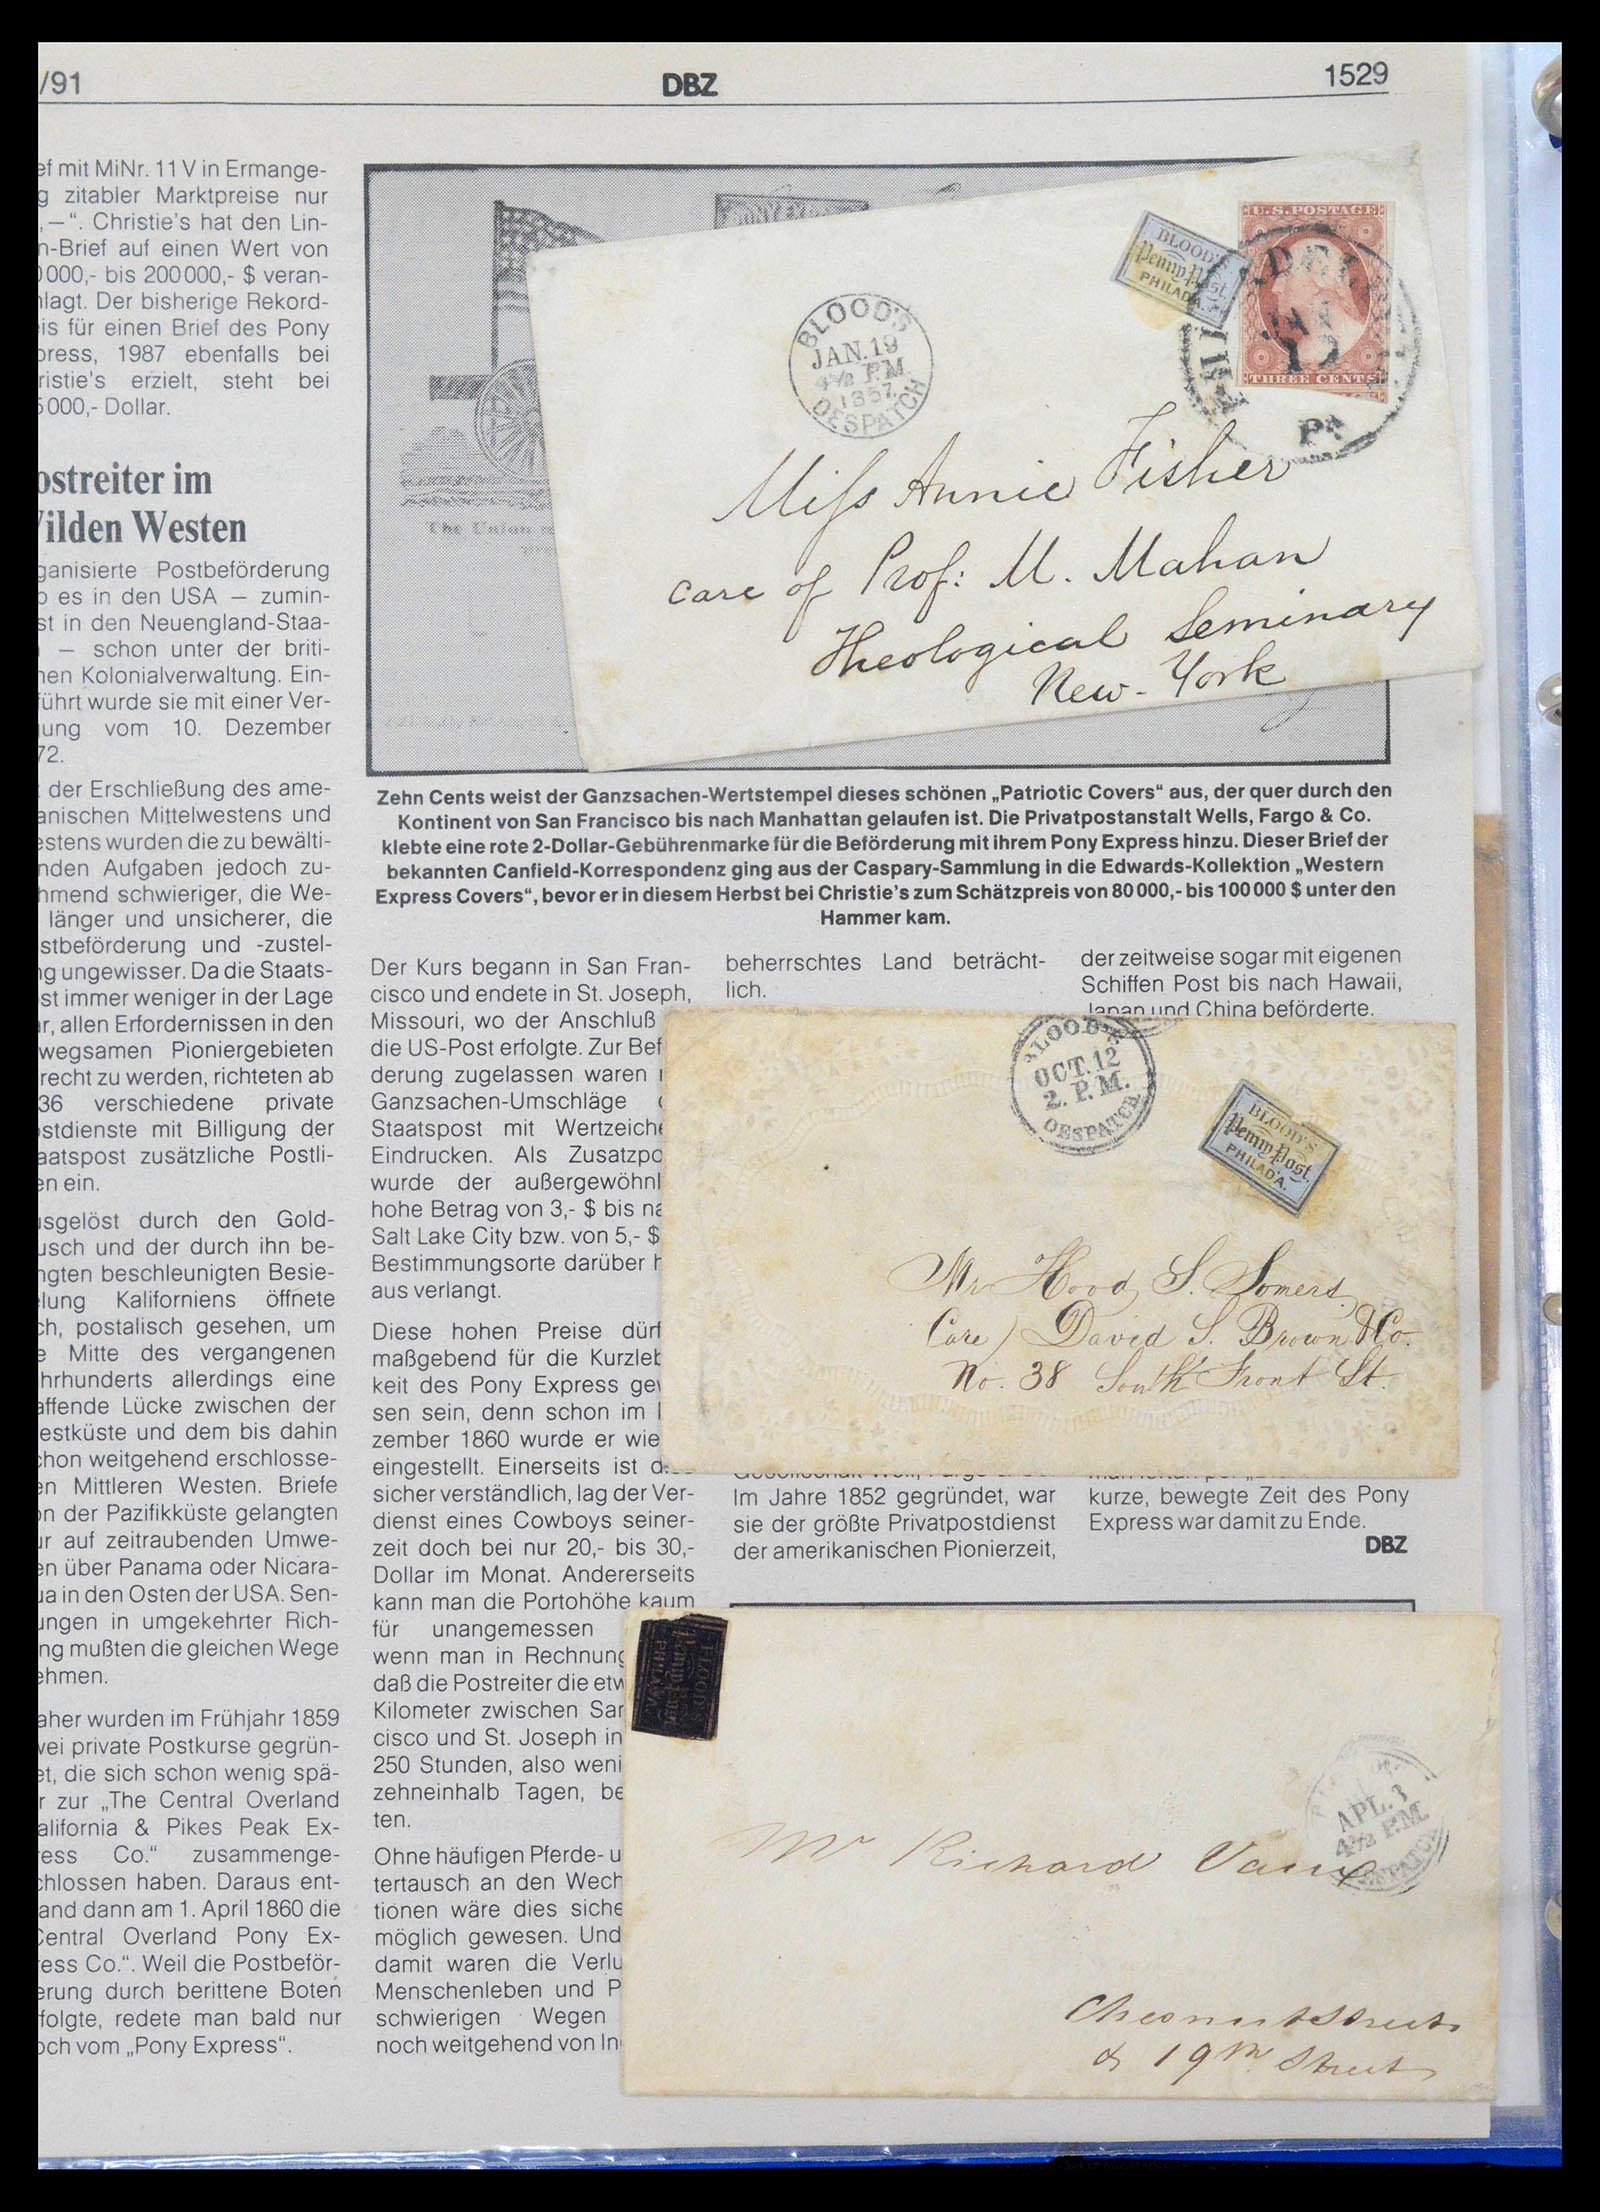 39374 0006 - Stamp collection 39374 USA locals 1850-1880.